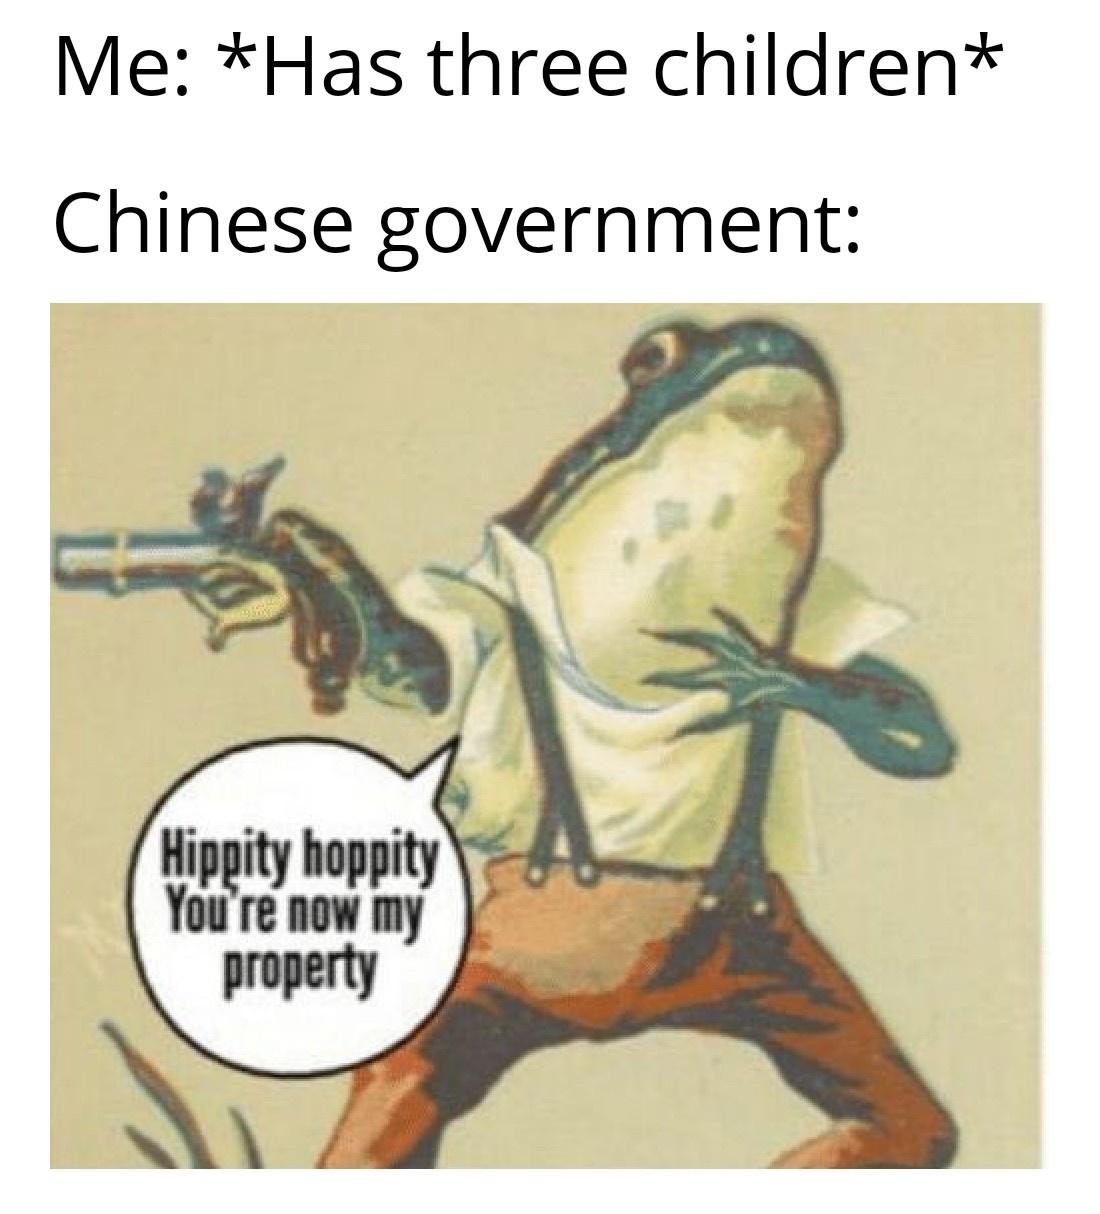 hippity hoppity you are now my property - Me Has three children Chinese government Hippity hoppity You're now my property